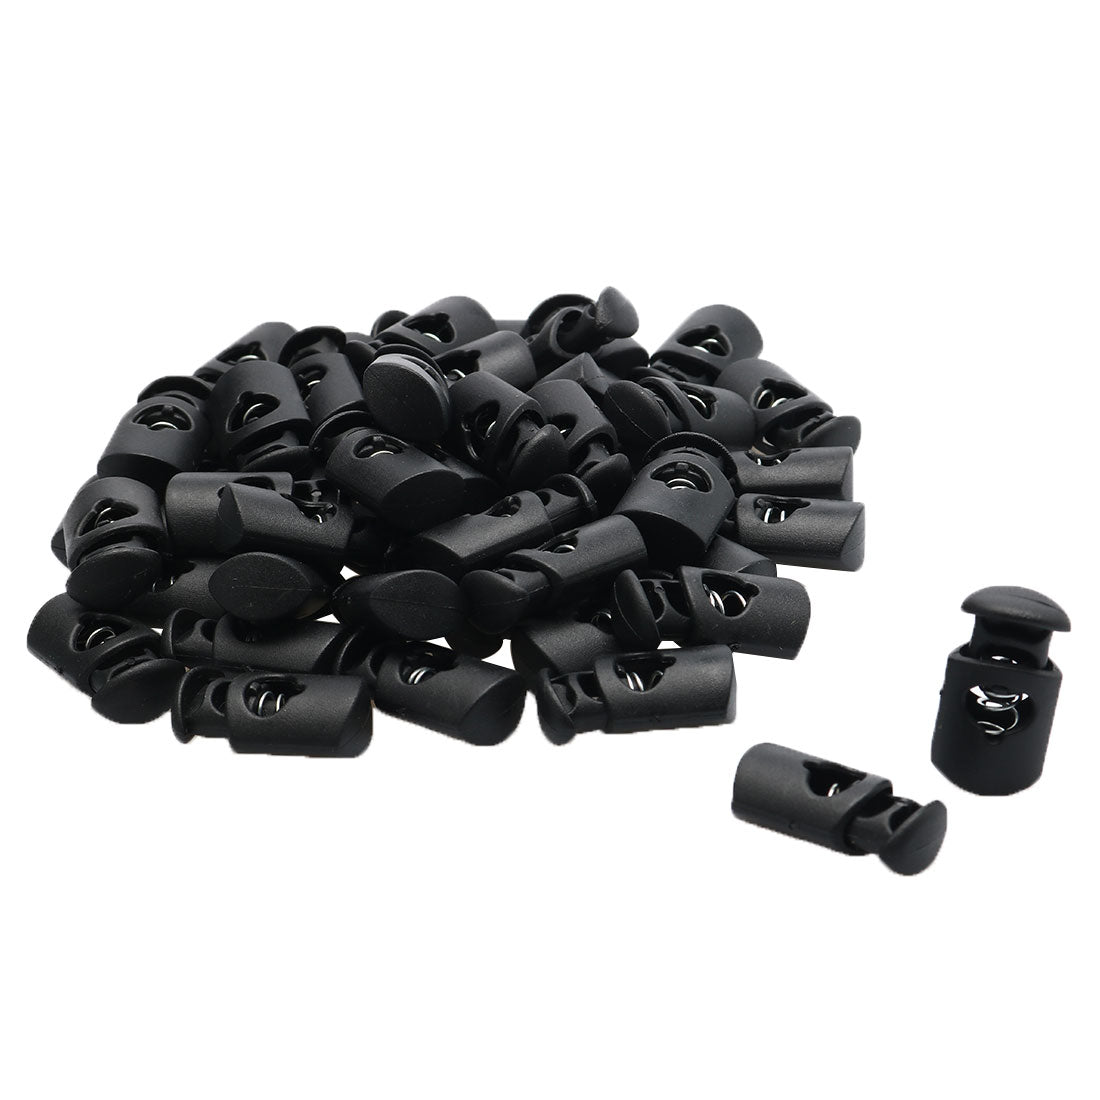 uxcell Uxcell Black Plastic Single Hole 6mm Dia Cylindrical Shape Spring Loaded Clamps Clip Clothes Rope Cord Locks Stopper Toggles 50pcs